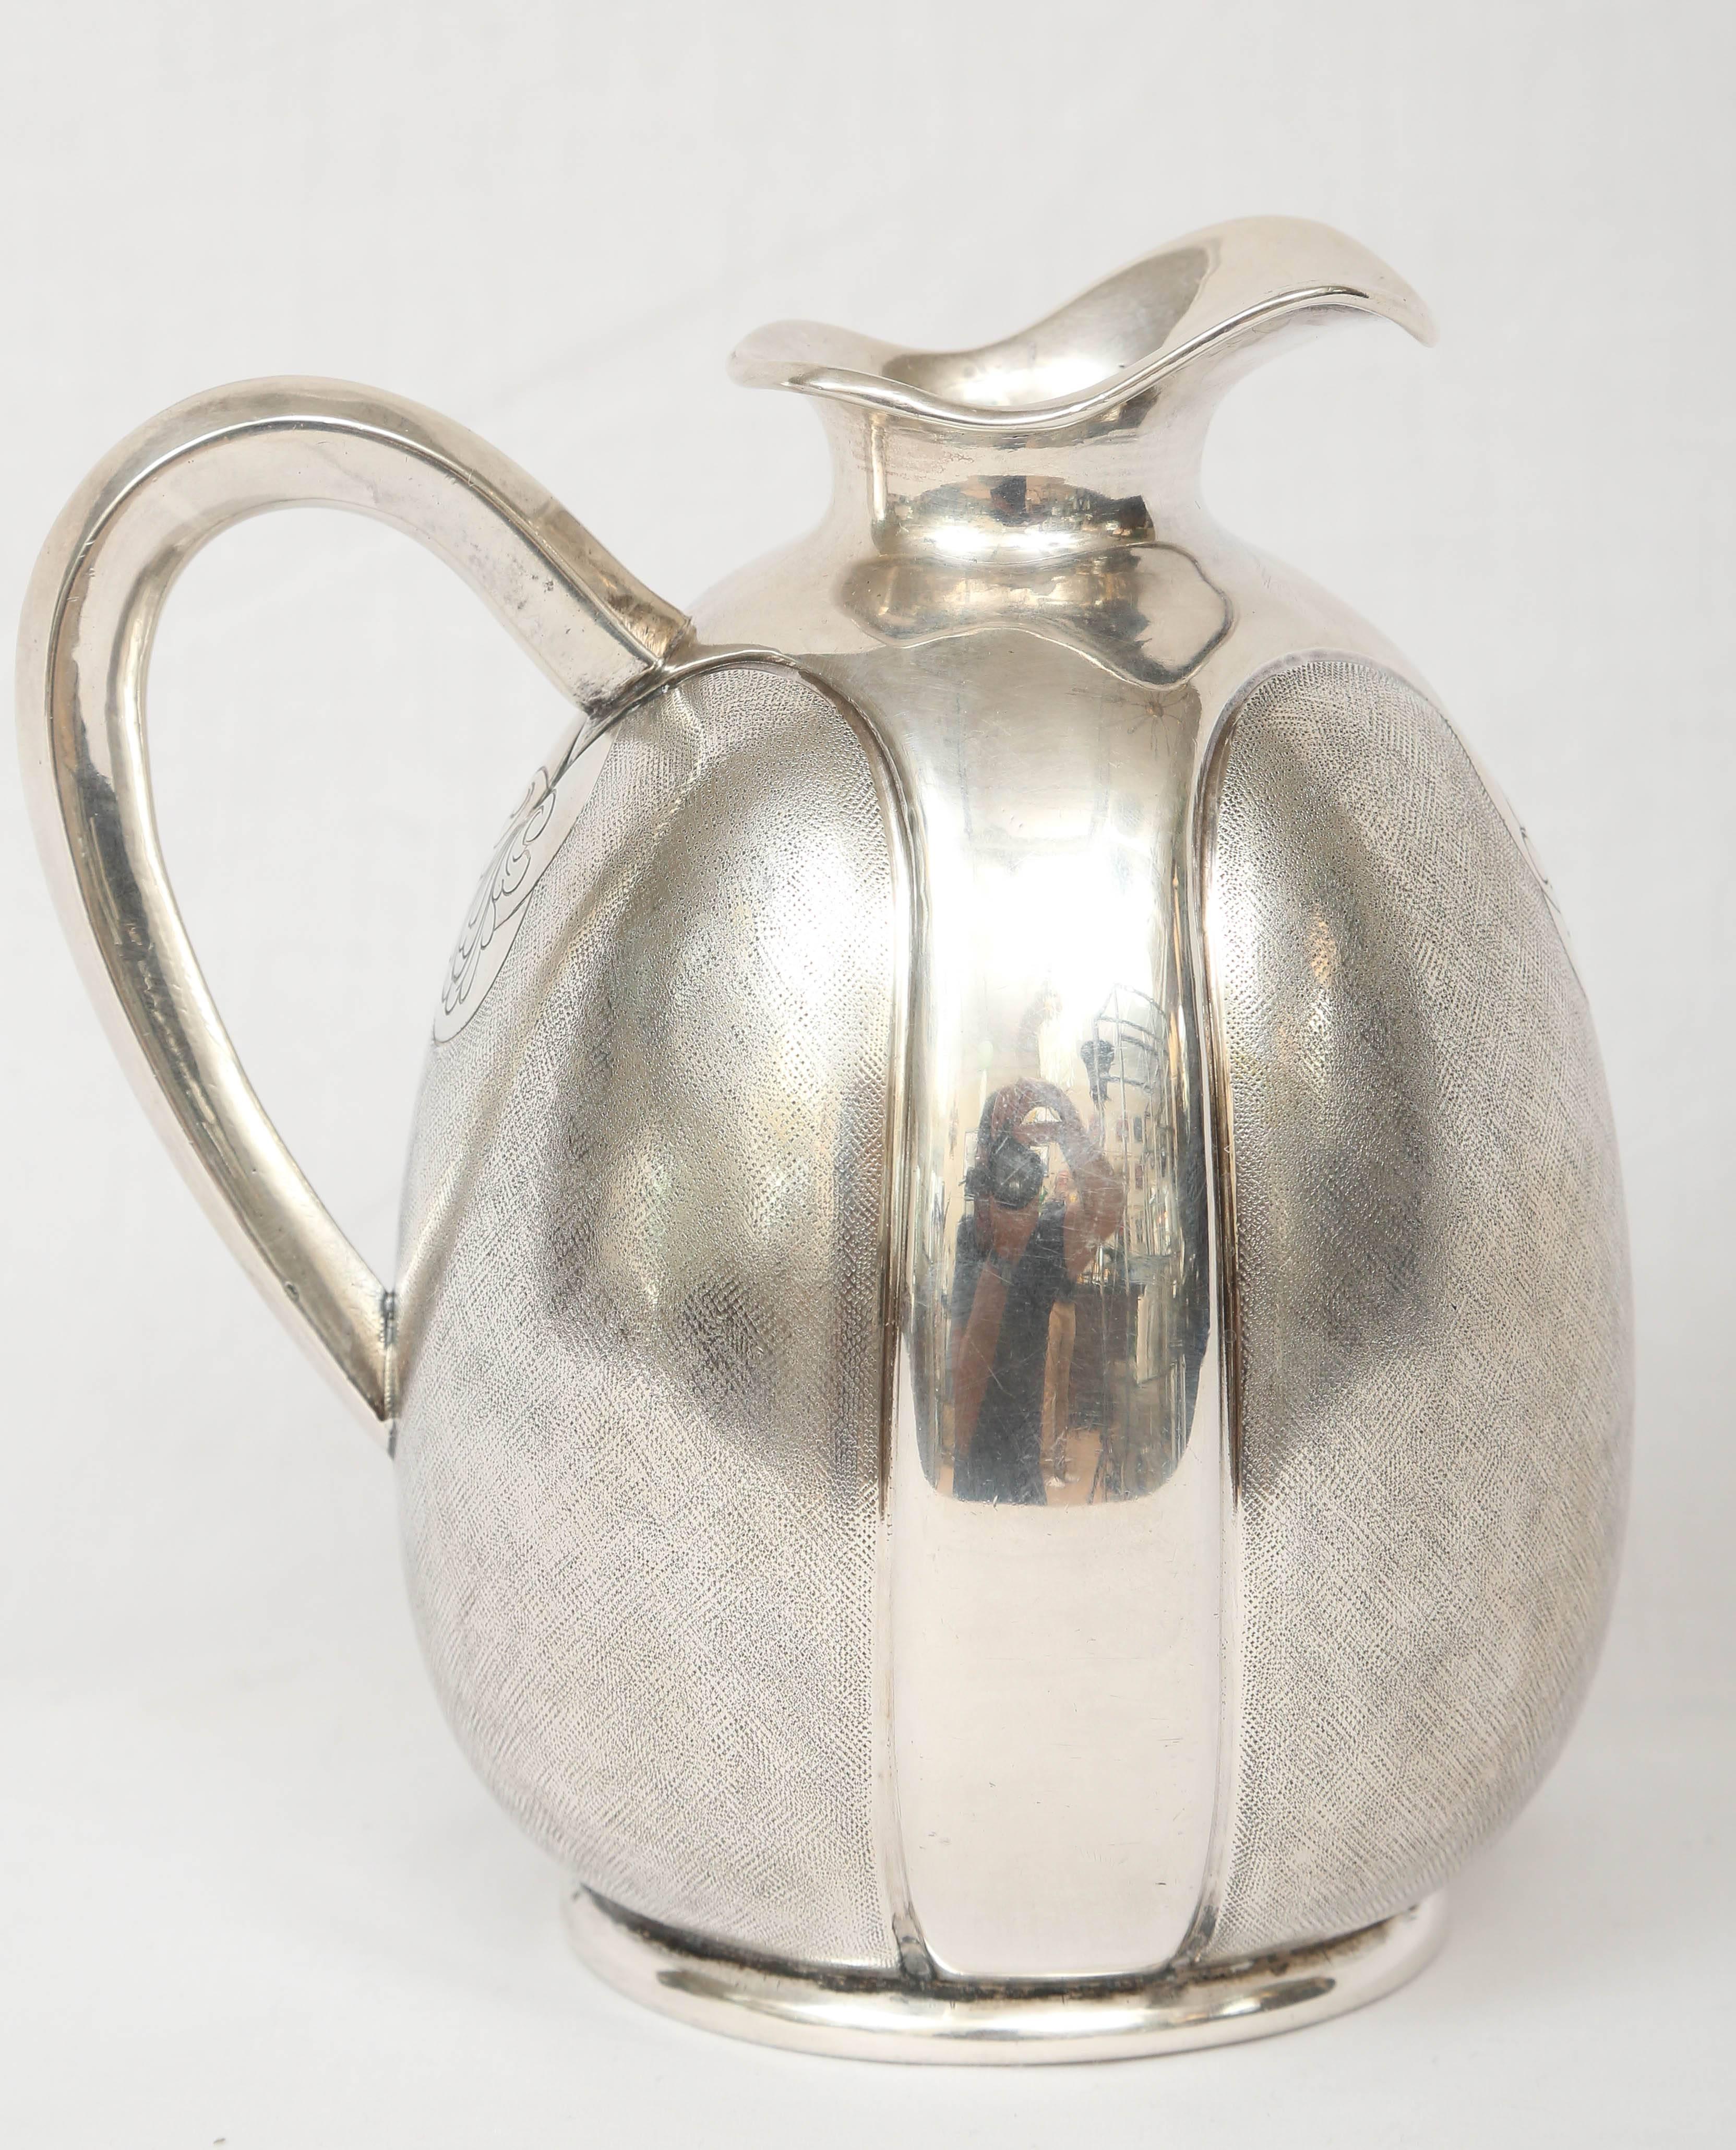 Art Deco vase by Fratelli Cacchione from Milano. Marked 39-MI. Beautiful silver vase or carafe crafted from 800 Silver in the Art Deco period.

The Italian jewelry centers writes the following about Fratelli Cacchione:
Company Profile
Fratelli